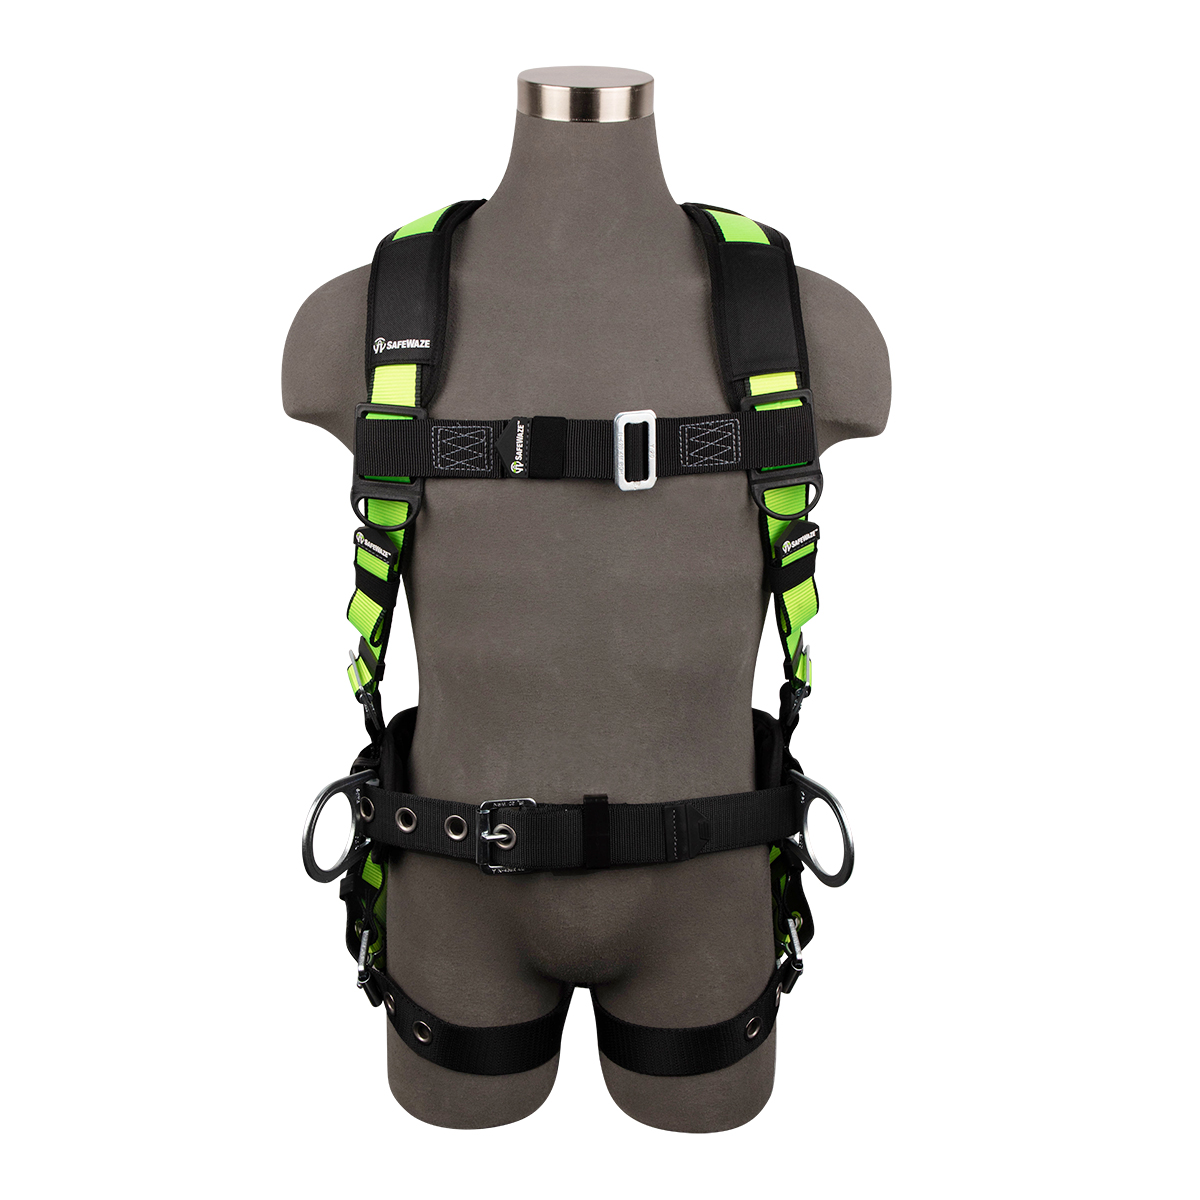 PRO Construction Harness - L - Utility and Pocket Knives